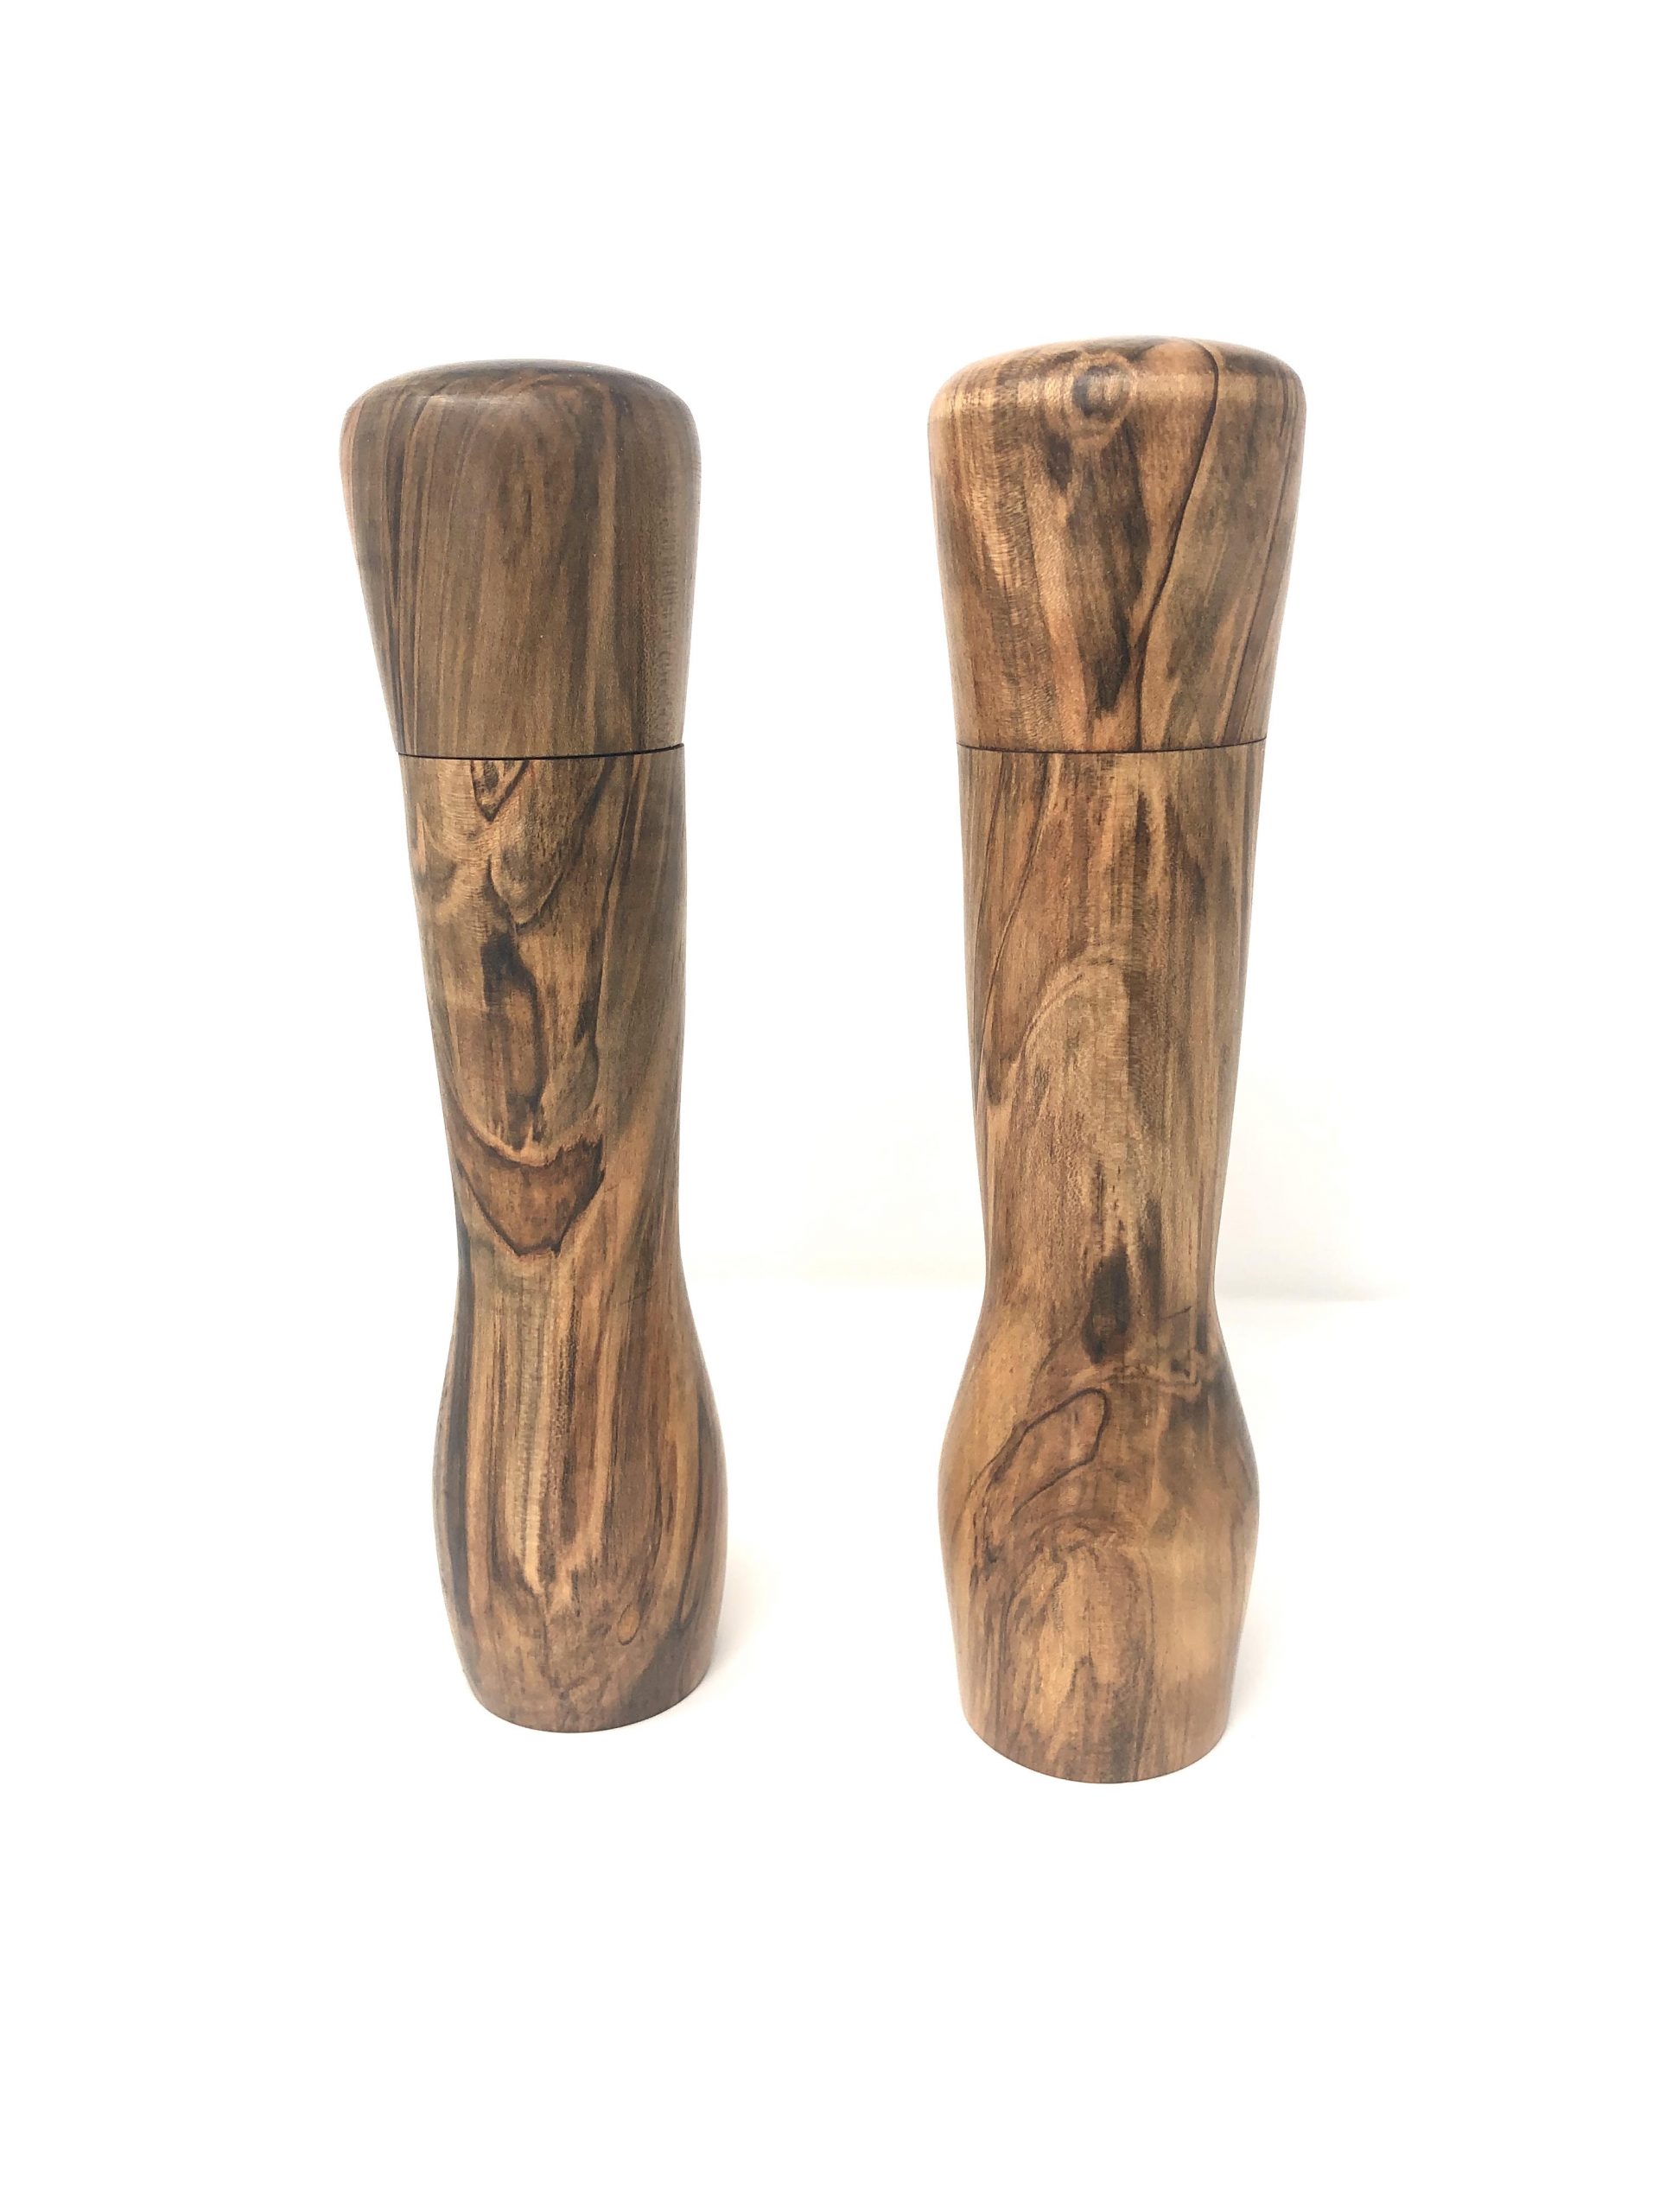 https://asthewoodspins.com/wp-content/uploads/2020/04/As-The-Wood-Spins-Wood-Turning-Gifts-and-Art-Pieces-Buffalo-NY-Peppermill-PAM1-Image-001-scaled.jpg